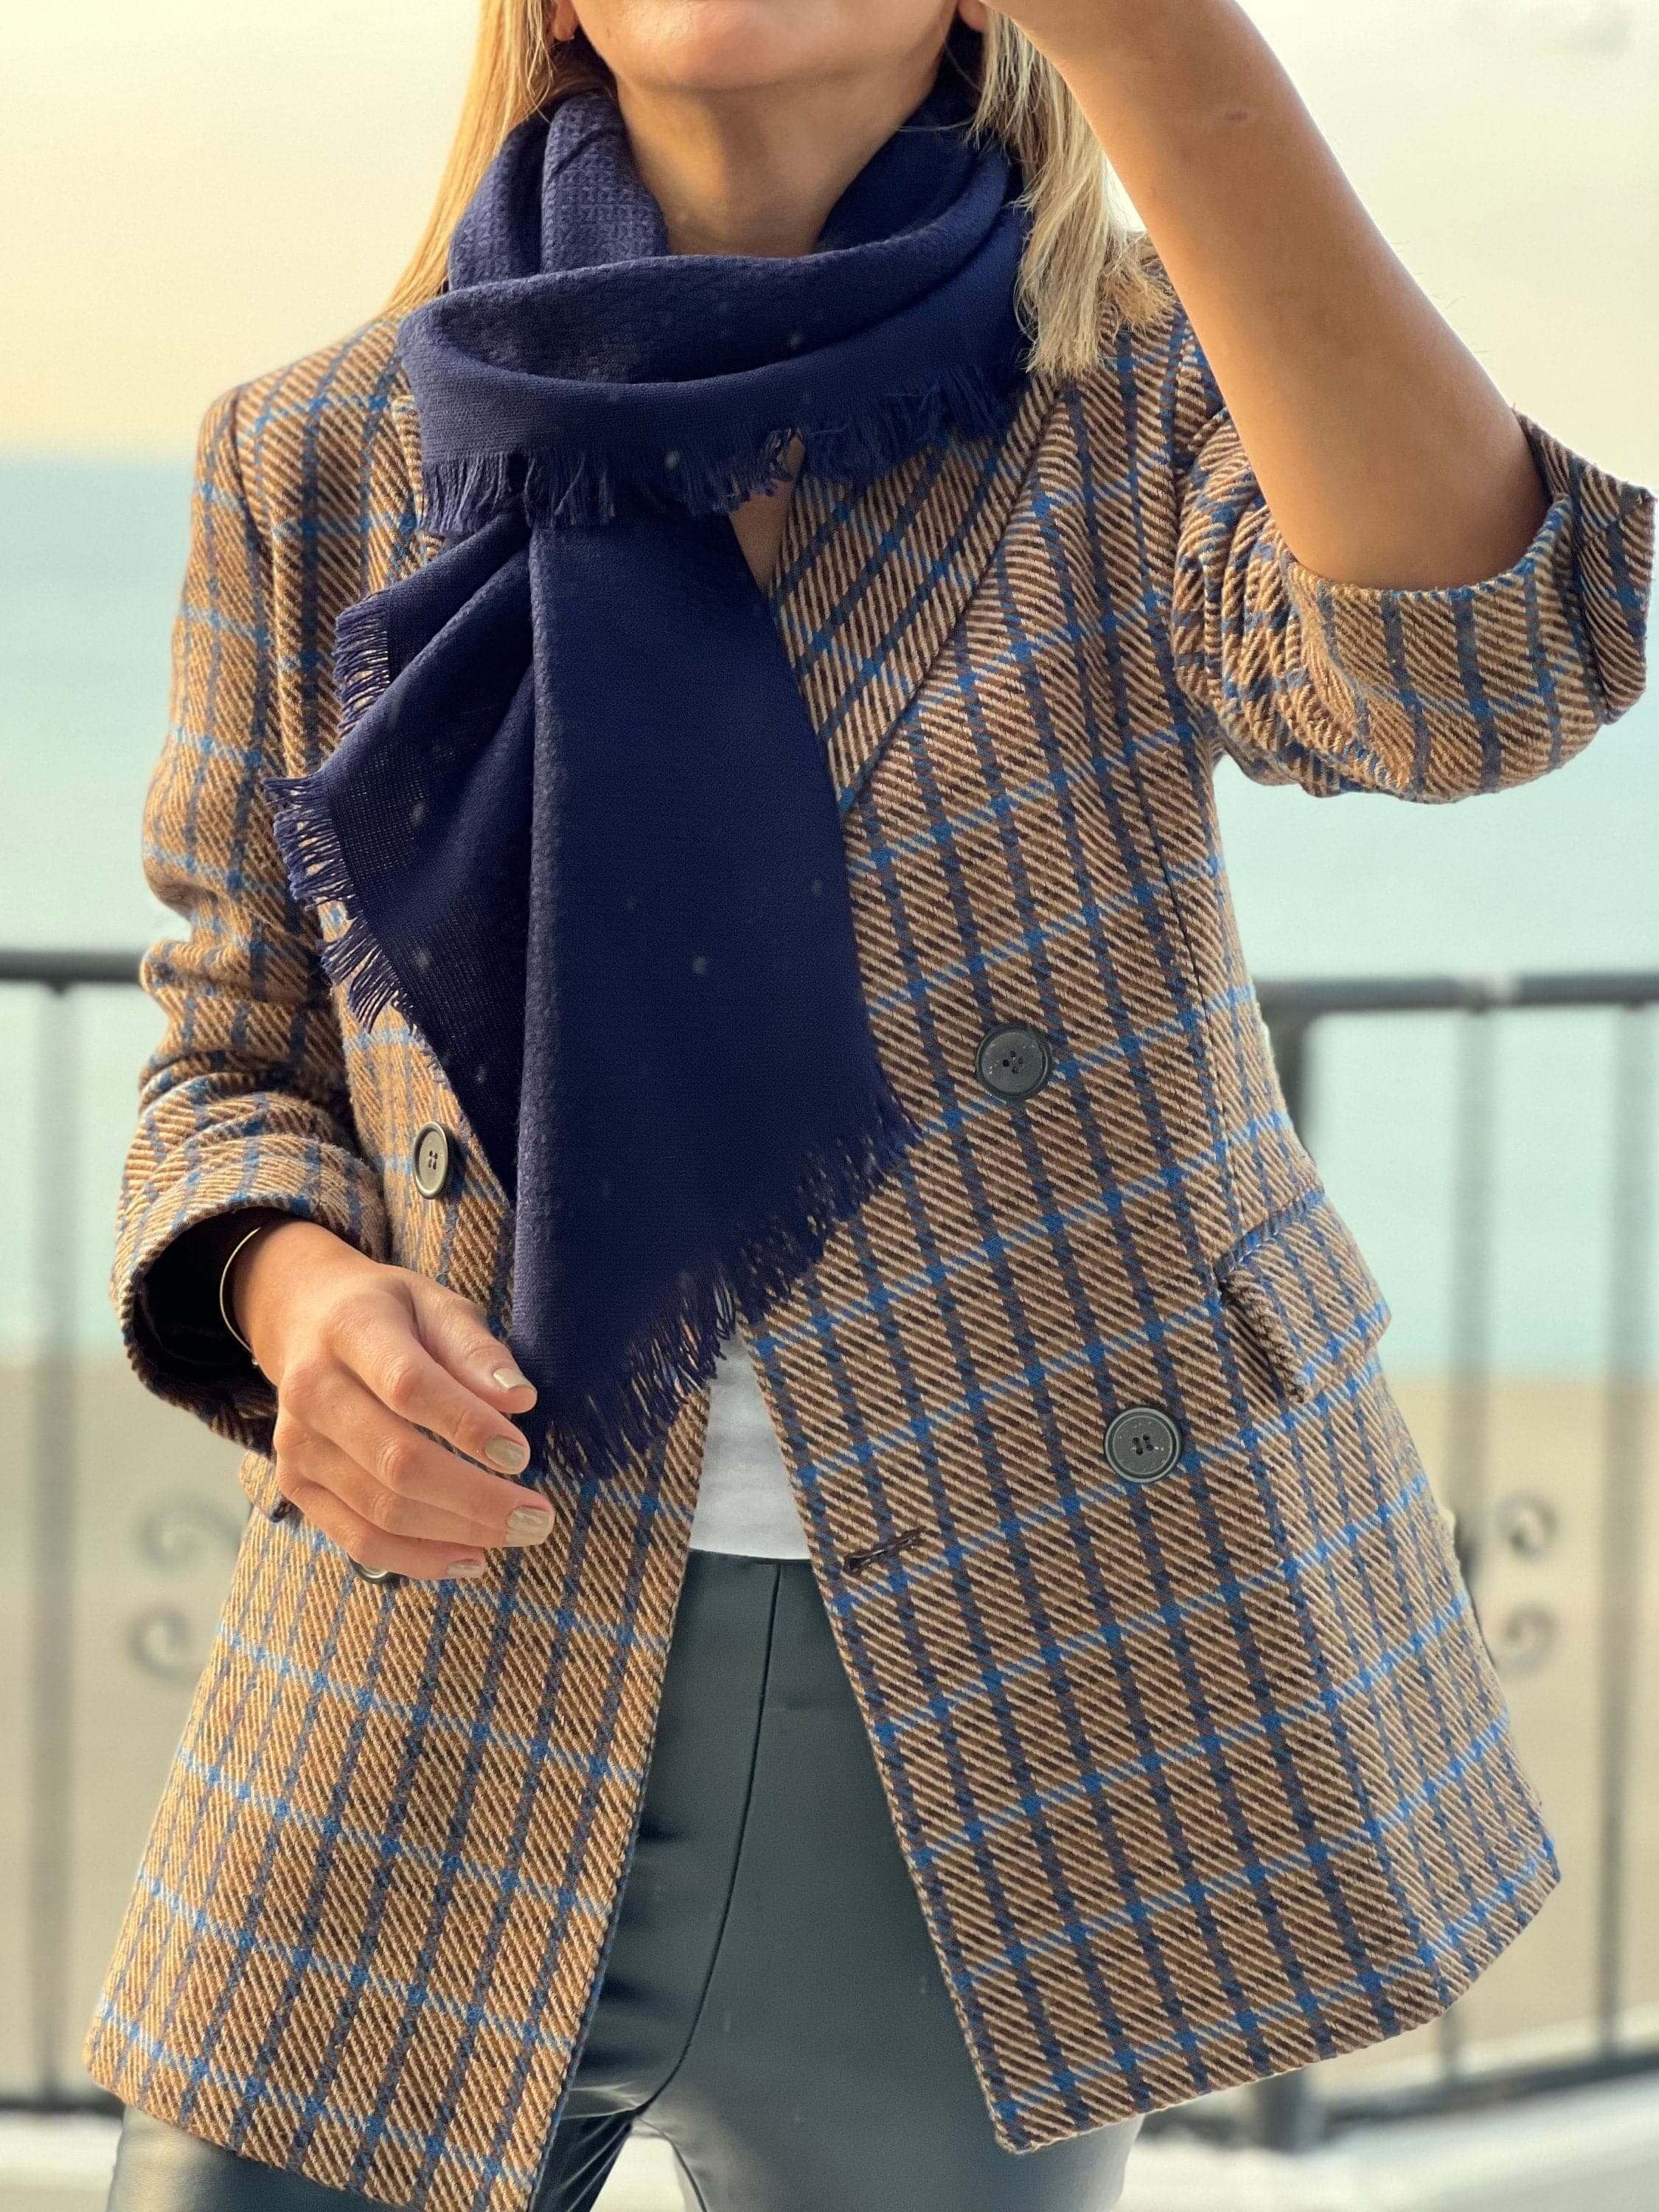 Add a pop of color to your winter wardrobe with this navy blue cotton wool blend scarf. A great gift for her, this solid scarf is soft and cozy.